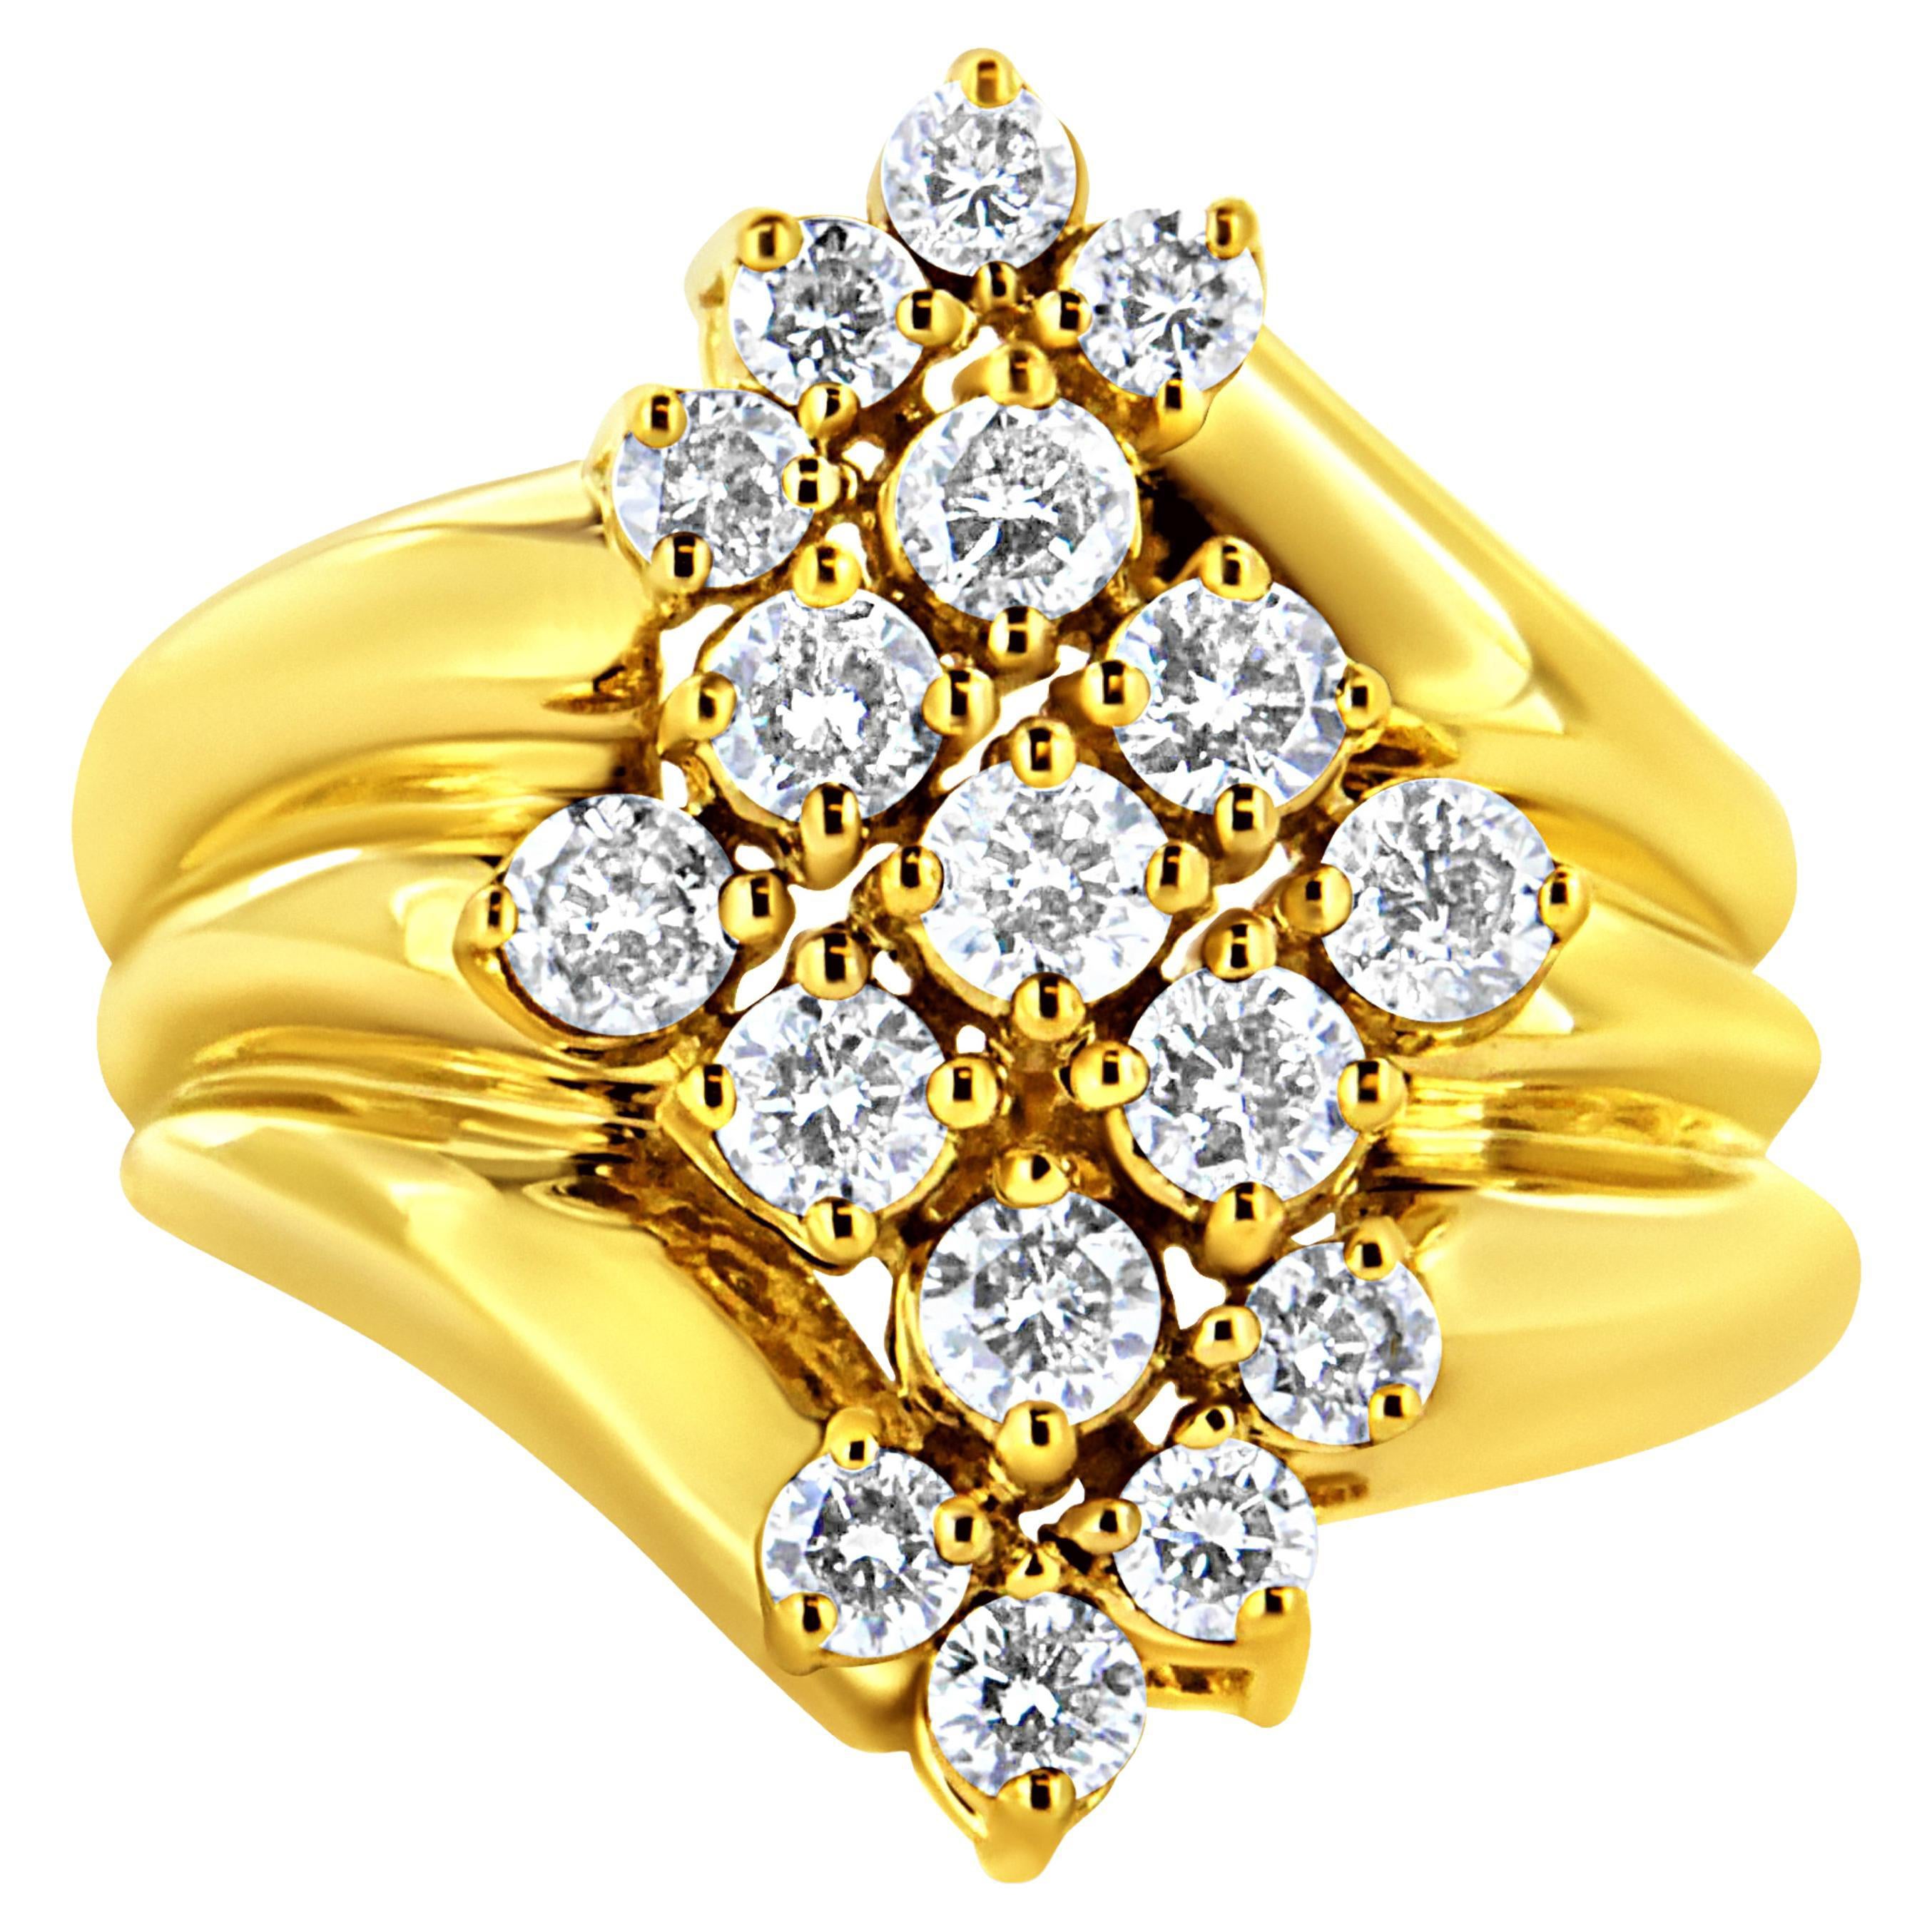 10K Yellow Gold Plated .925 Sterling Silver 1 1/2 Carat Diamond Cocktail Ring For Sale